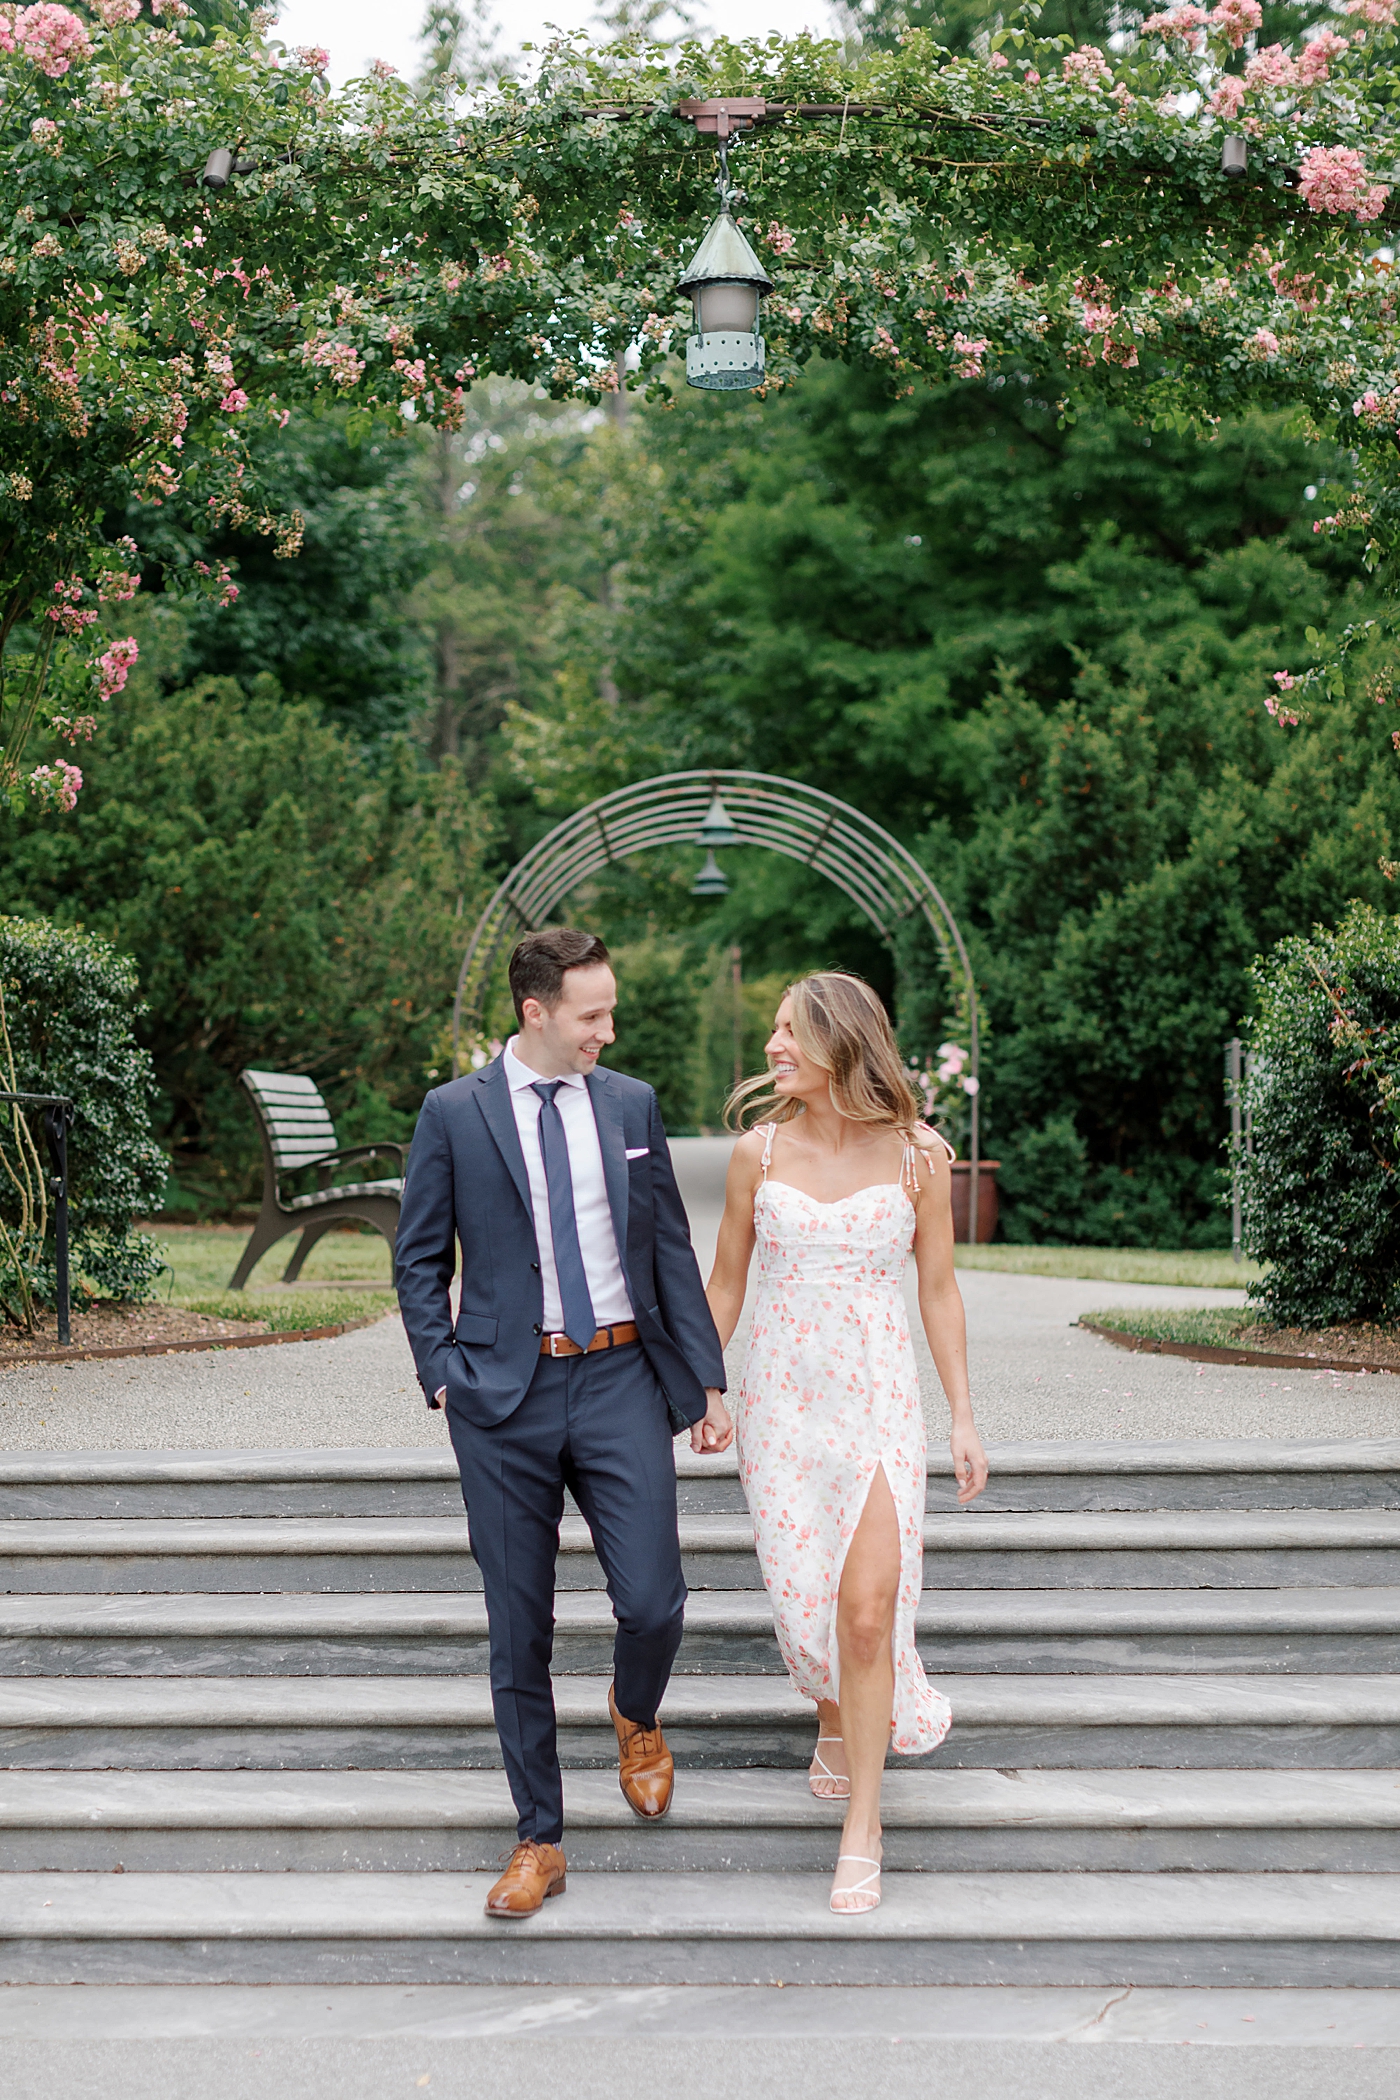 Couple walking down stairs holding hands and smiling | Photo by Hope Helmuth Photography